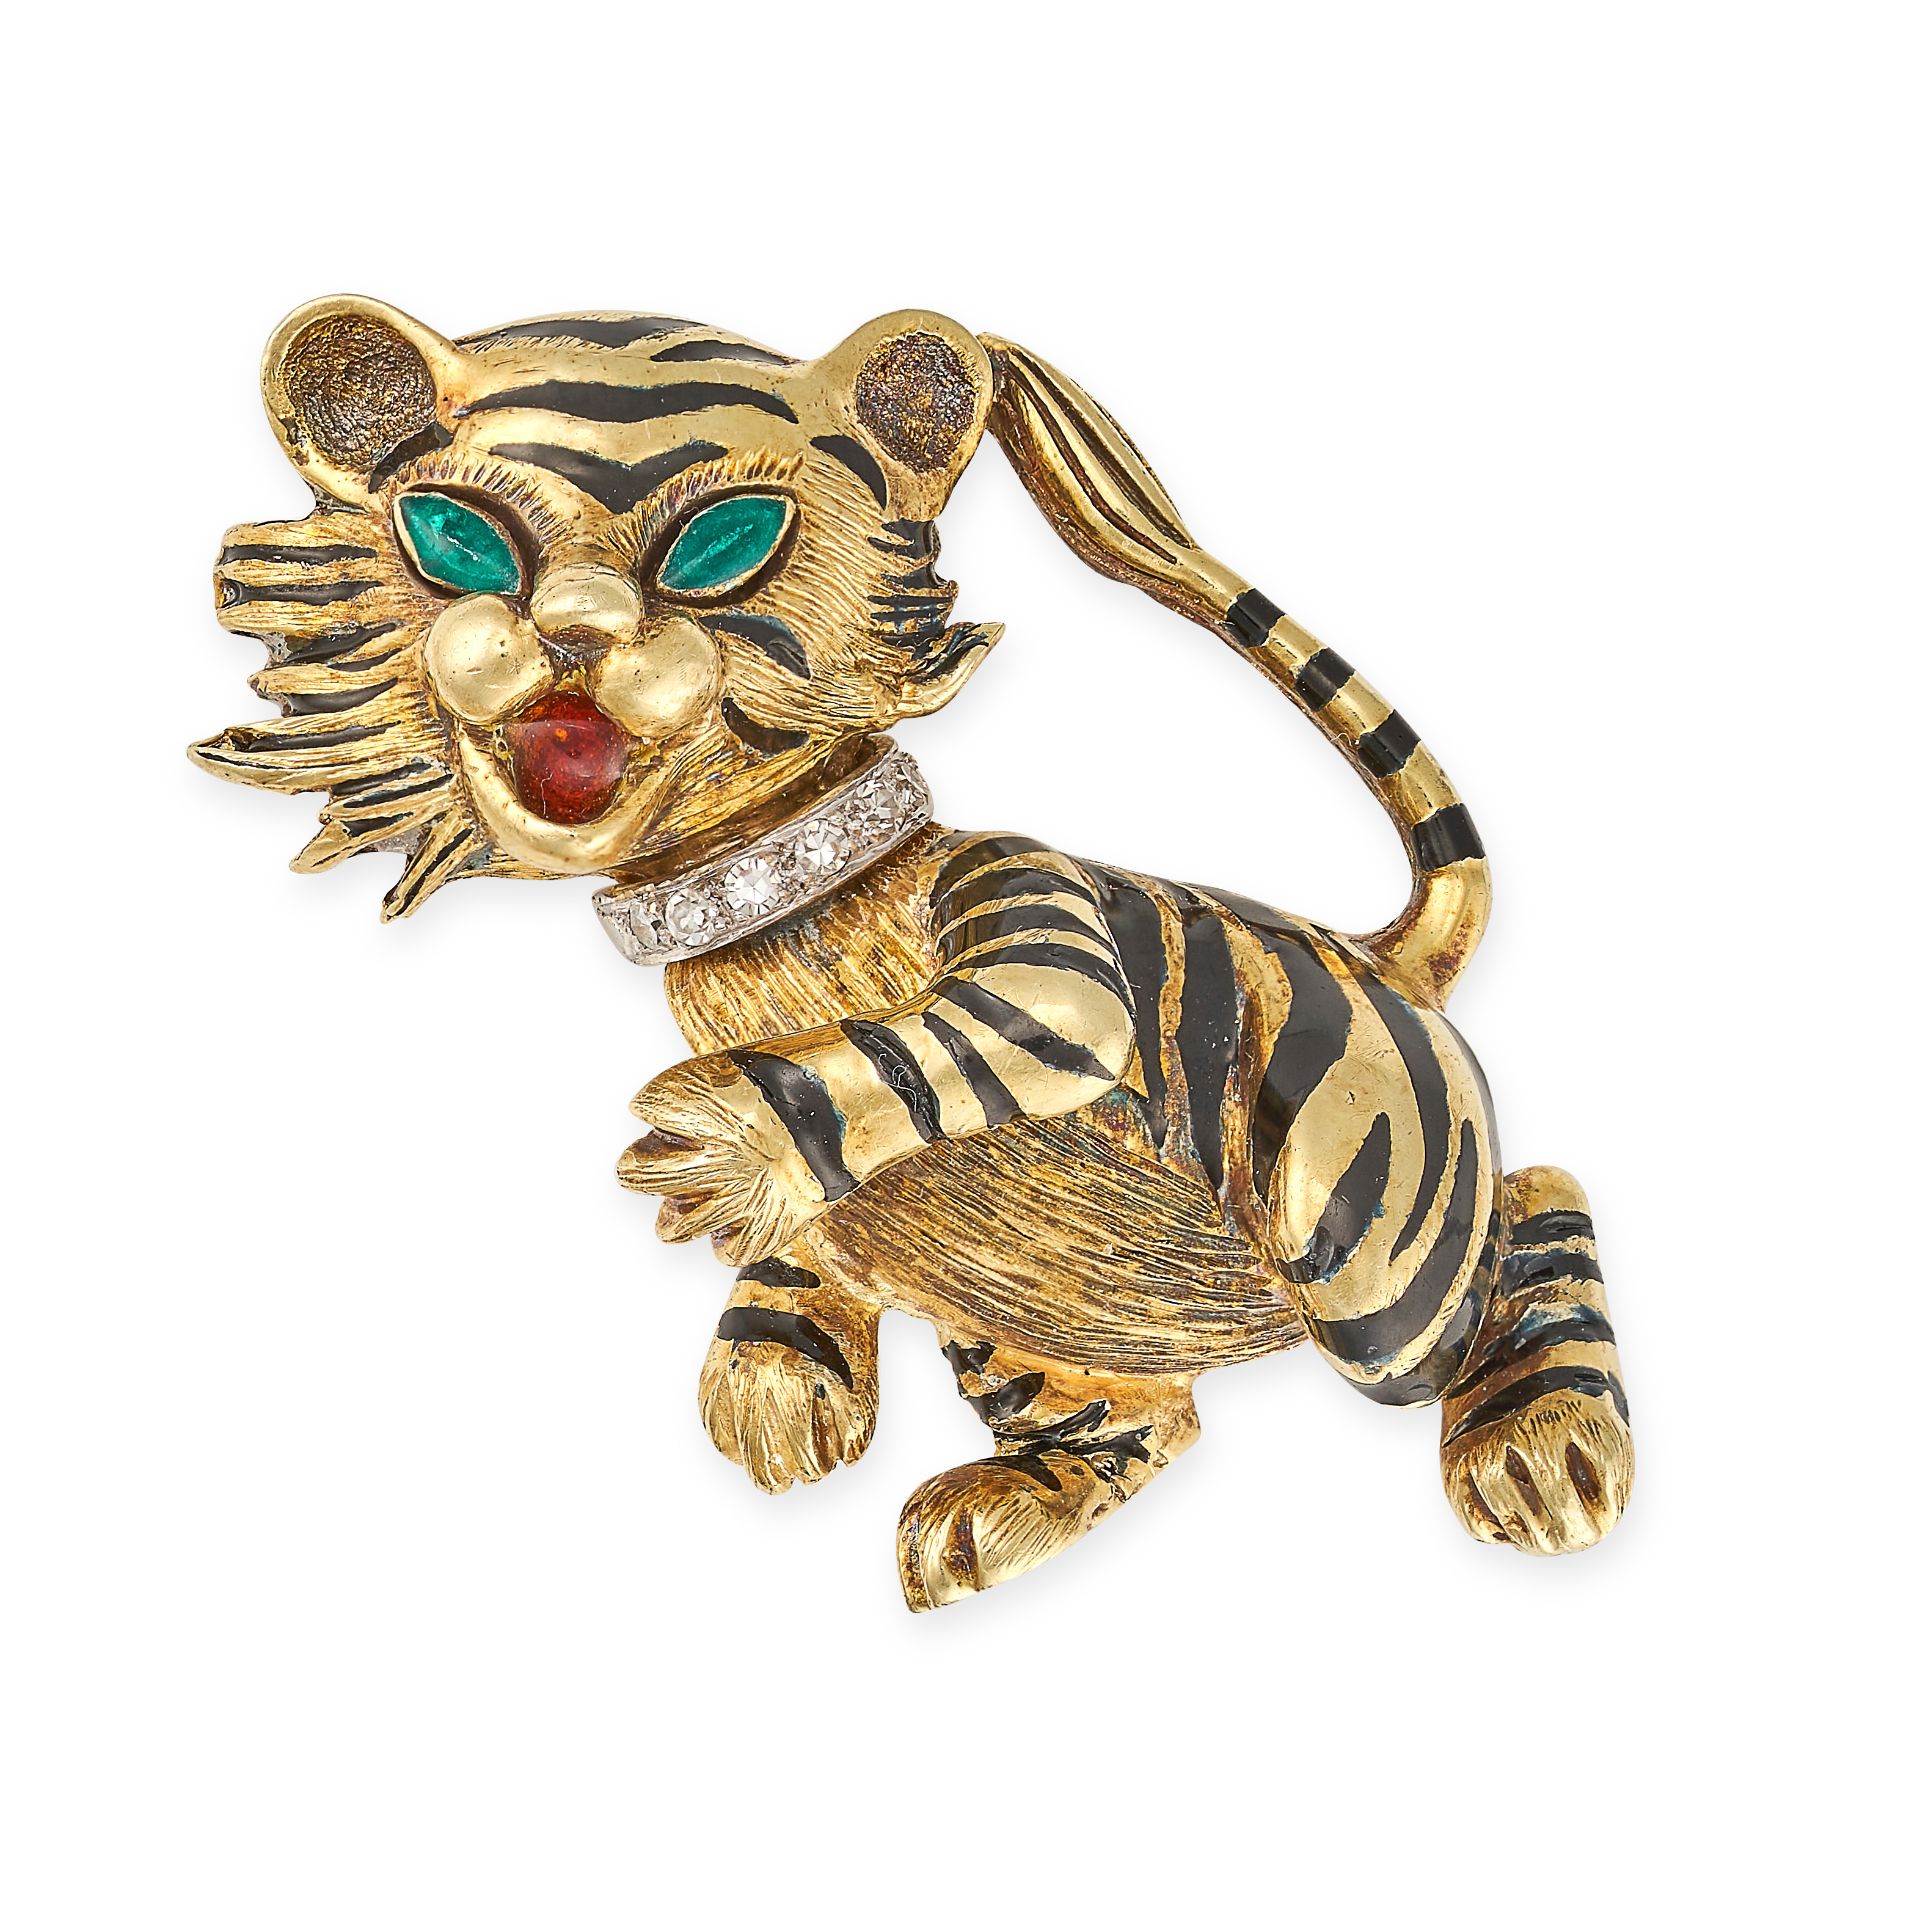 A DIAMOND AND ENAMEL TIGER BROOCH in 14ct yellow gold, designed as a tiger accented by black enam...